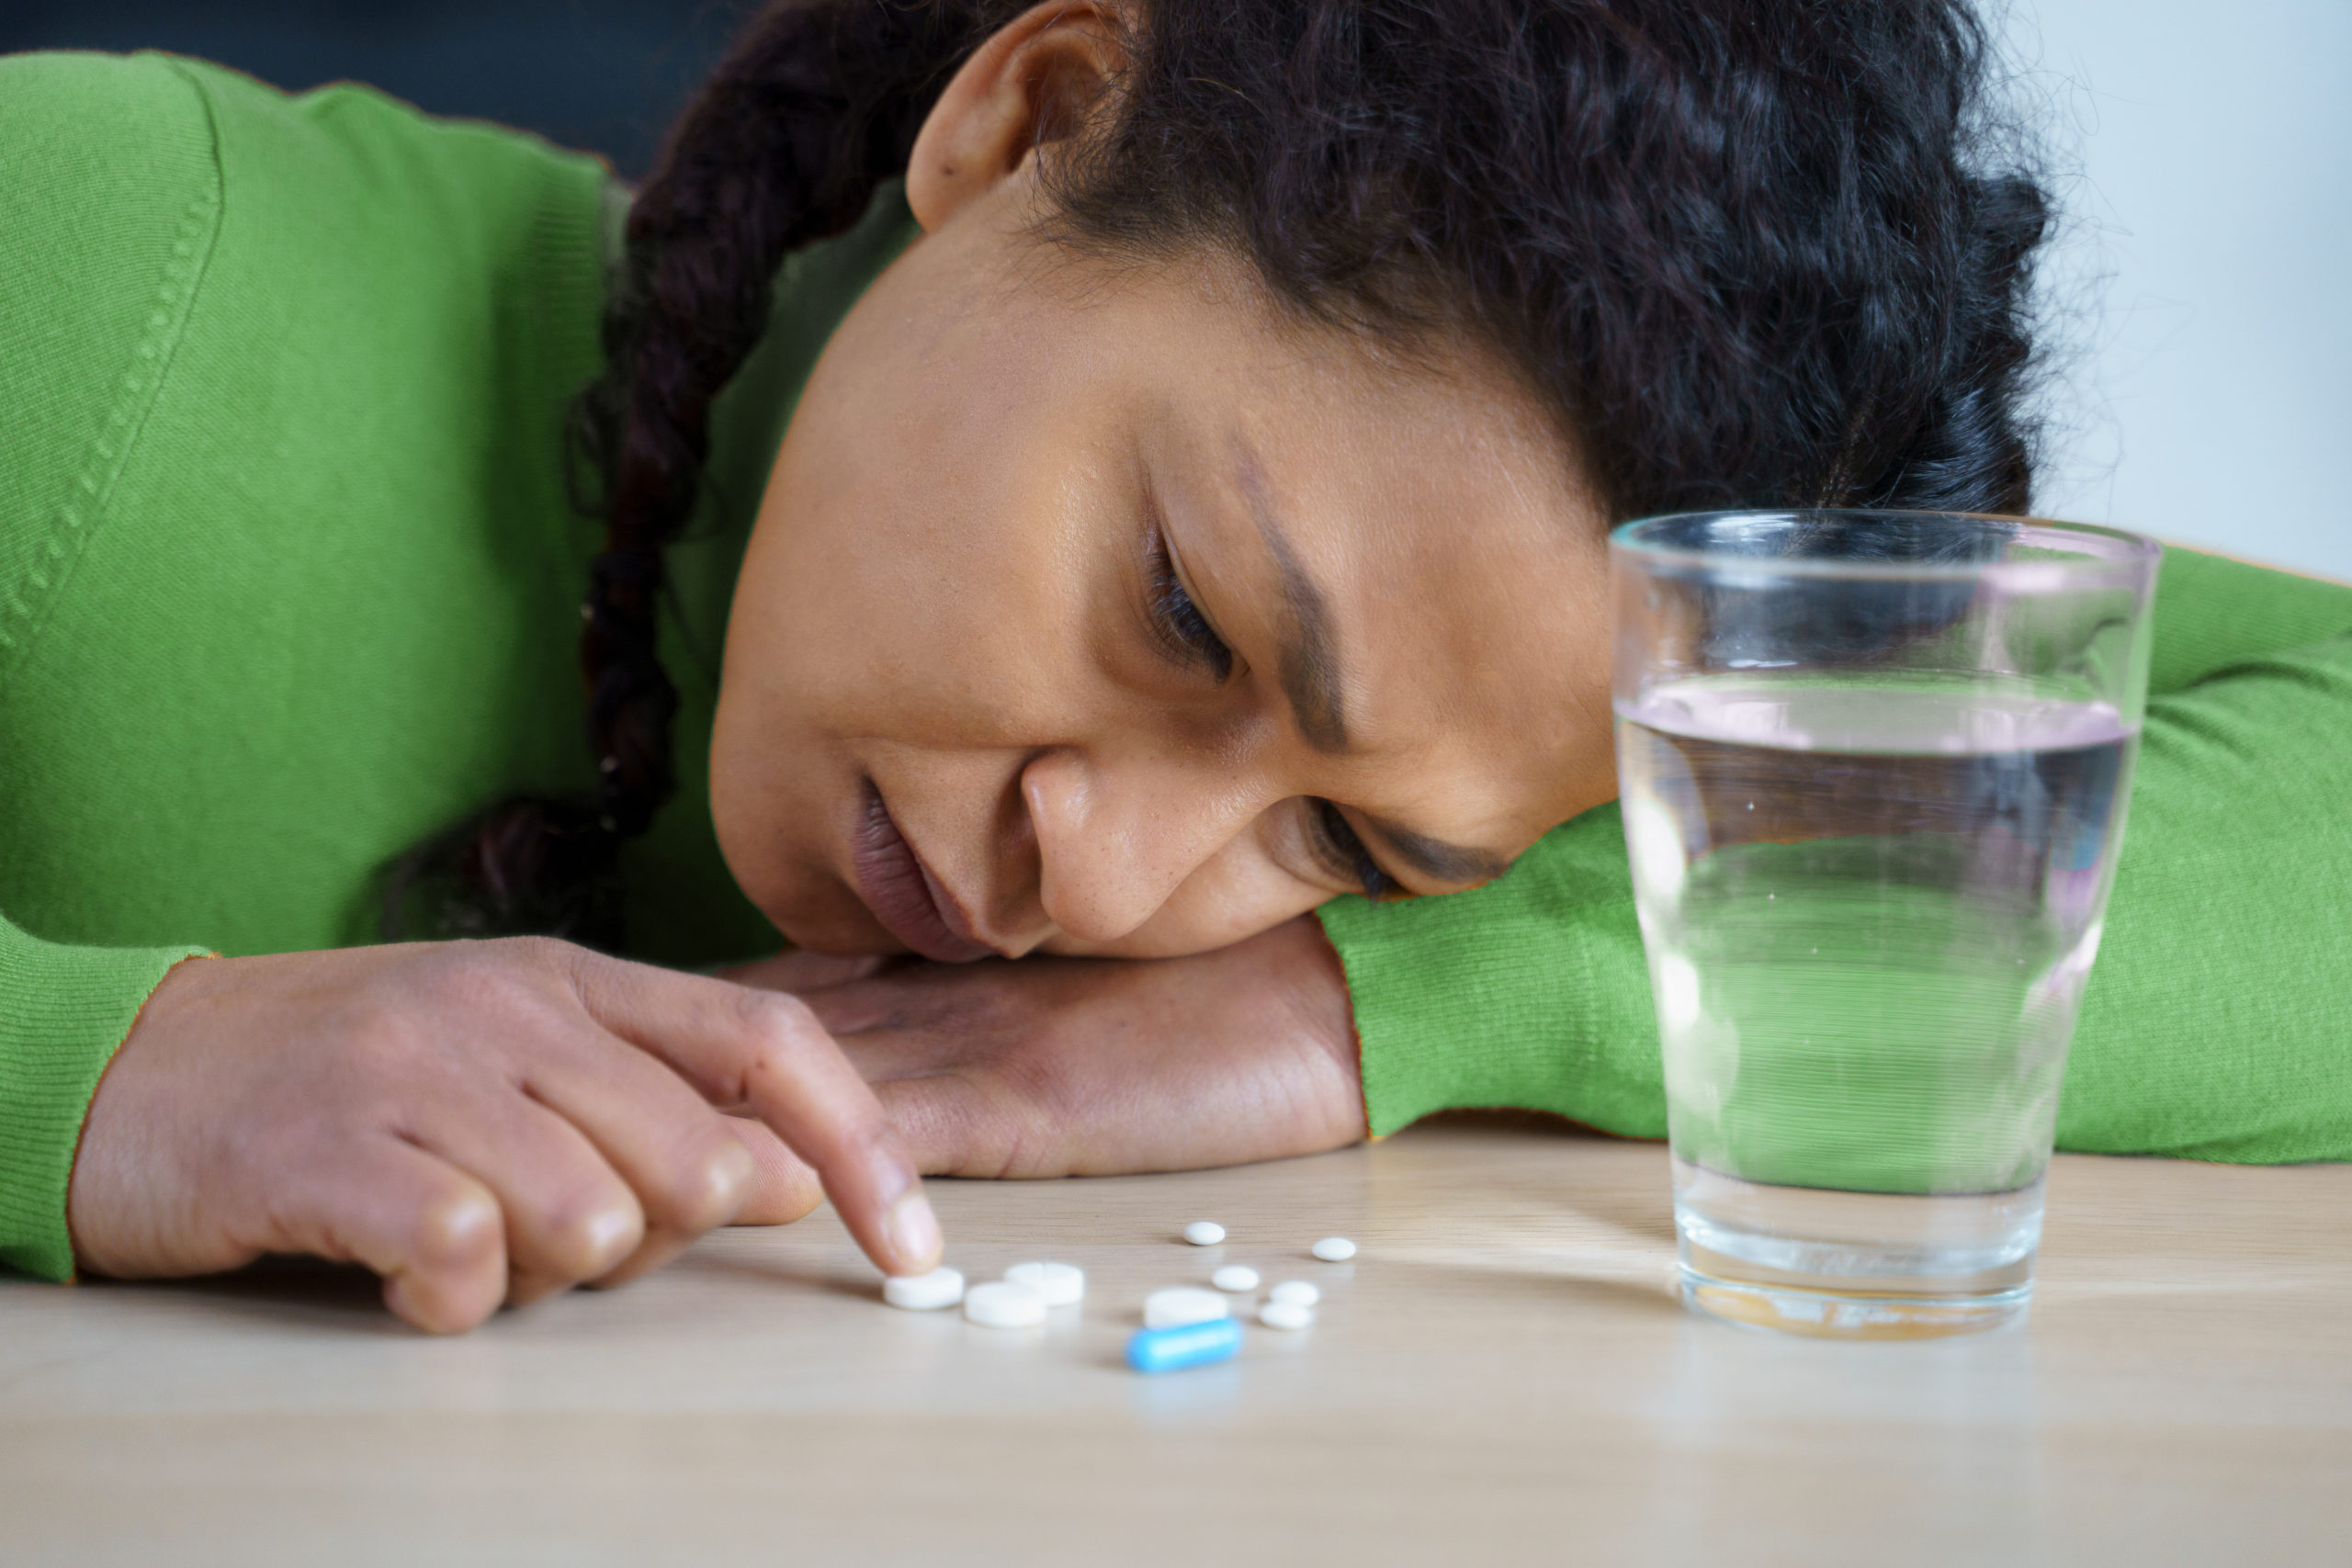 What Are the Signs of Benzo Addiction?